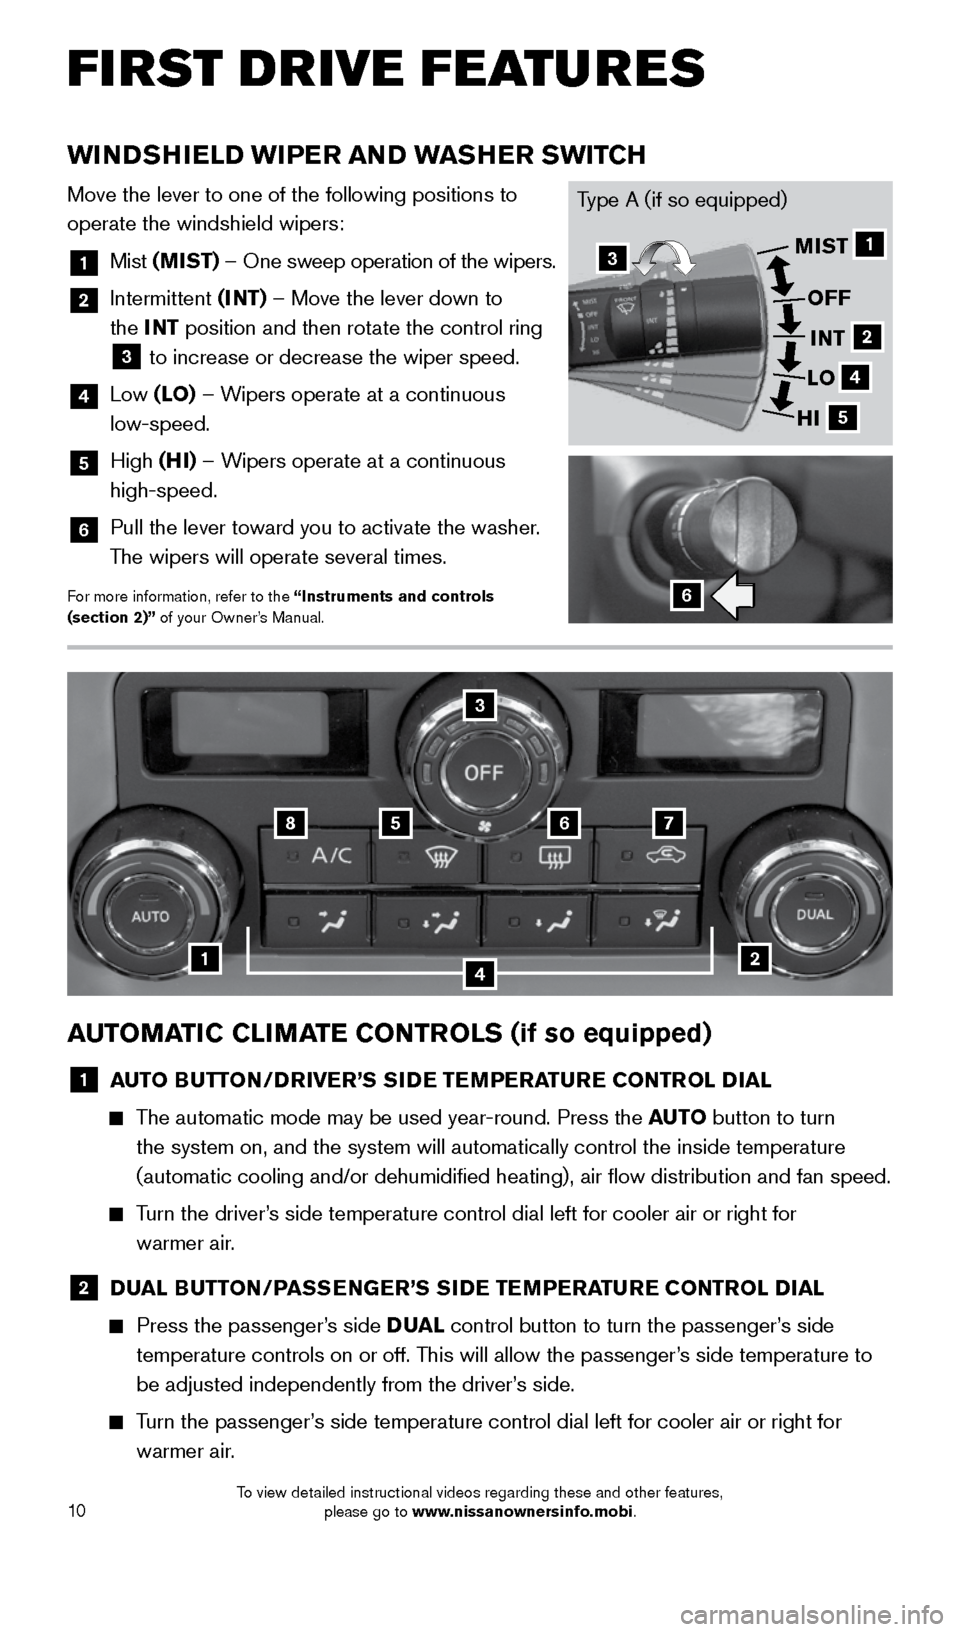 NISSAN FRONTIER 2015 D23 / 3.G Quick Reference Guide 10
WINDSHIELD WIPER AND WASHER SWITCH
Move the lever to one of the following positions to 
operate the windshield wipers:
1   Mist (MIST) – One sweep operation of the wipers.
2   Intermittent  (INT)